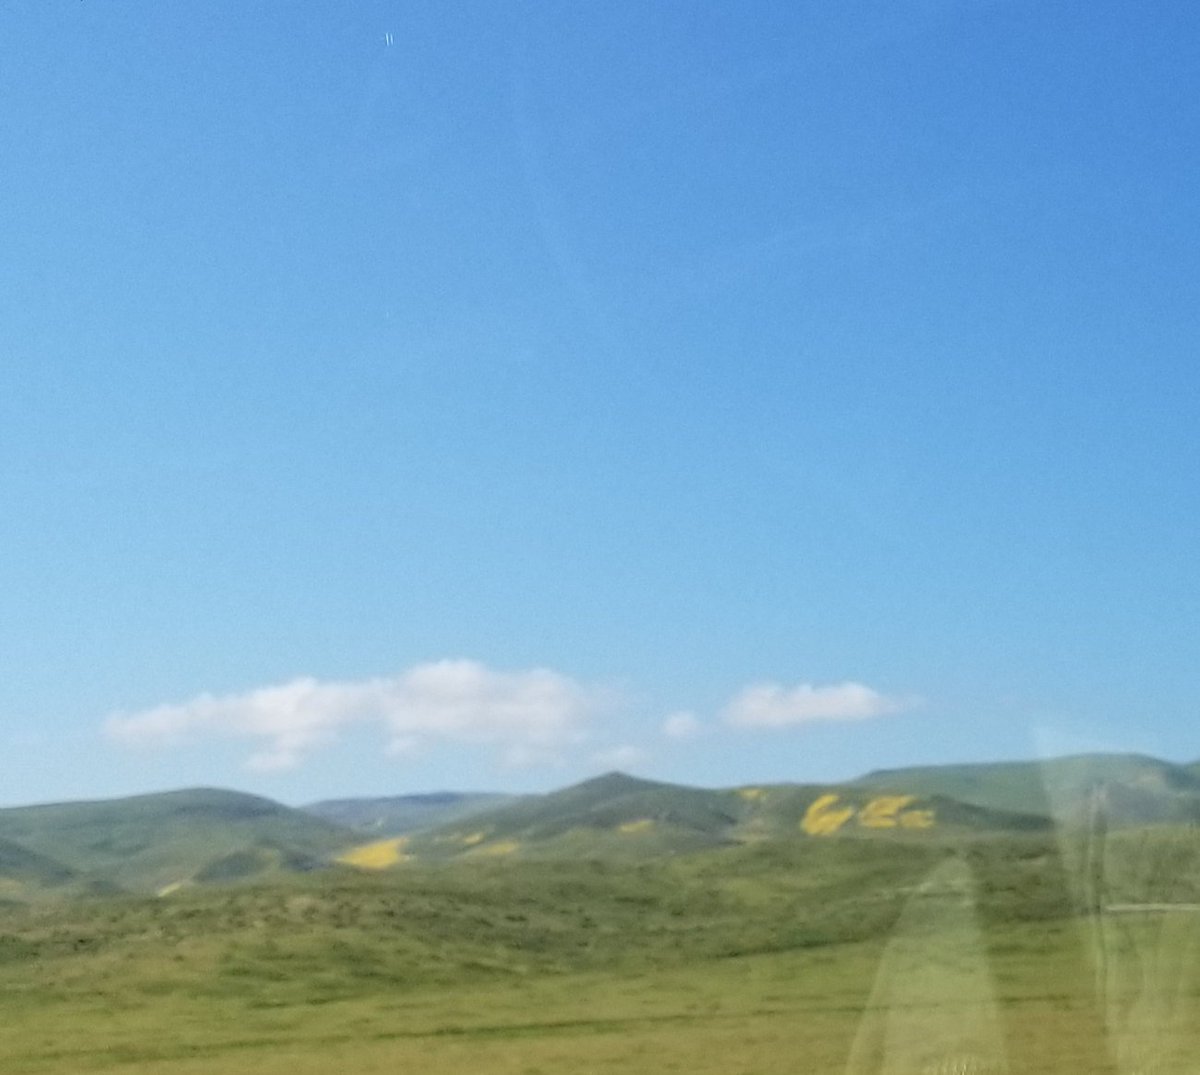 You could see the shades of yellow wildflowers on the side of the hills
#CentralCalifornia